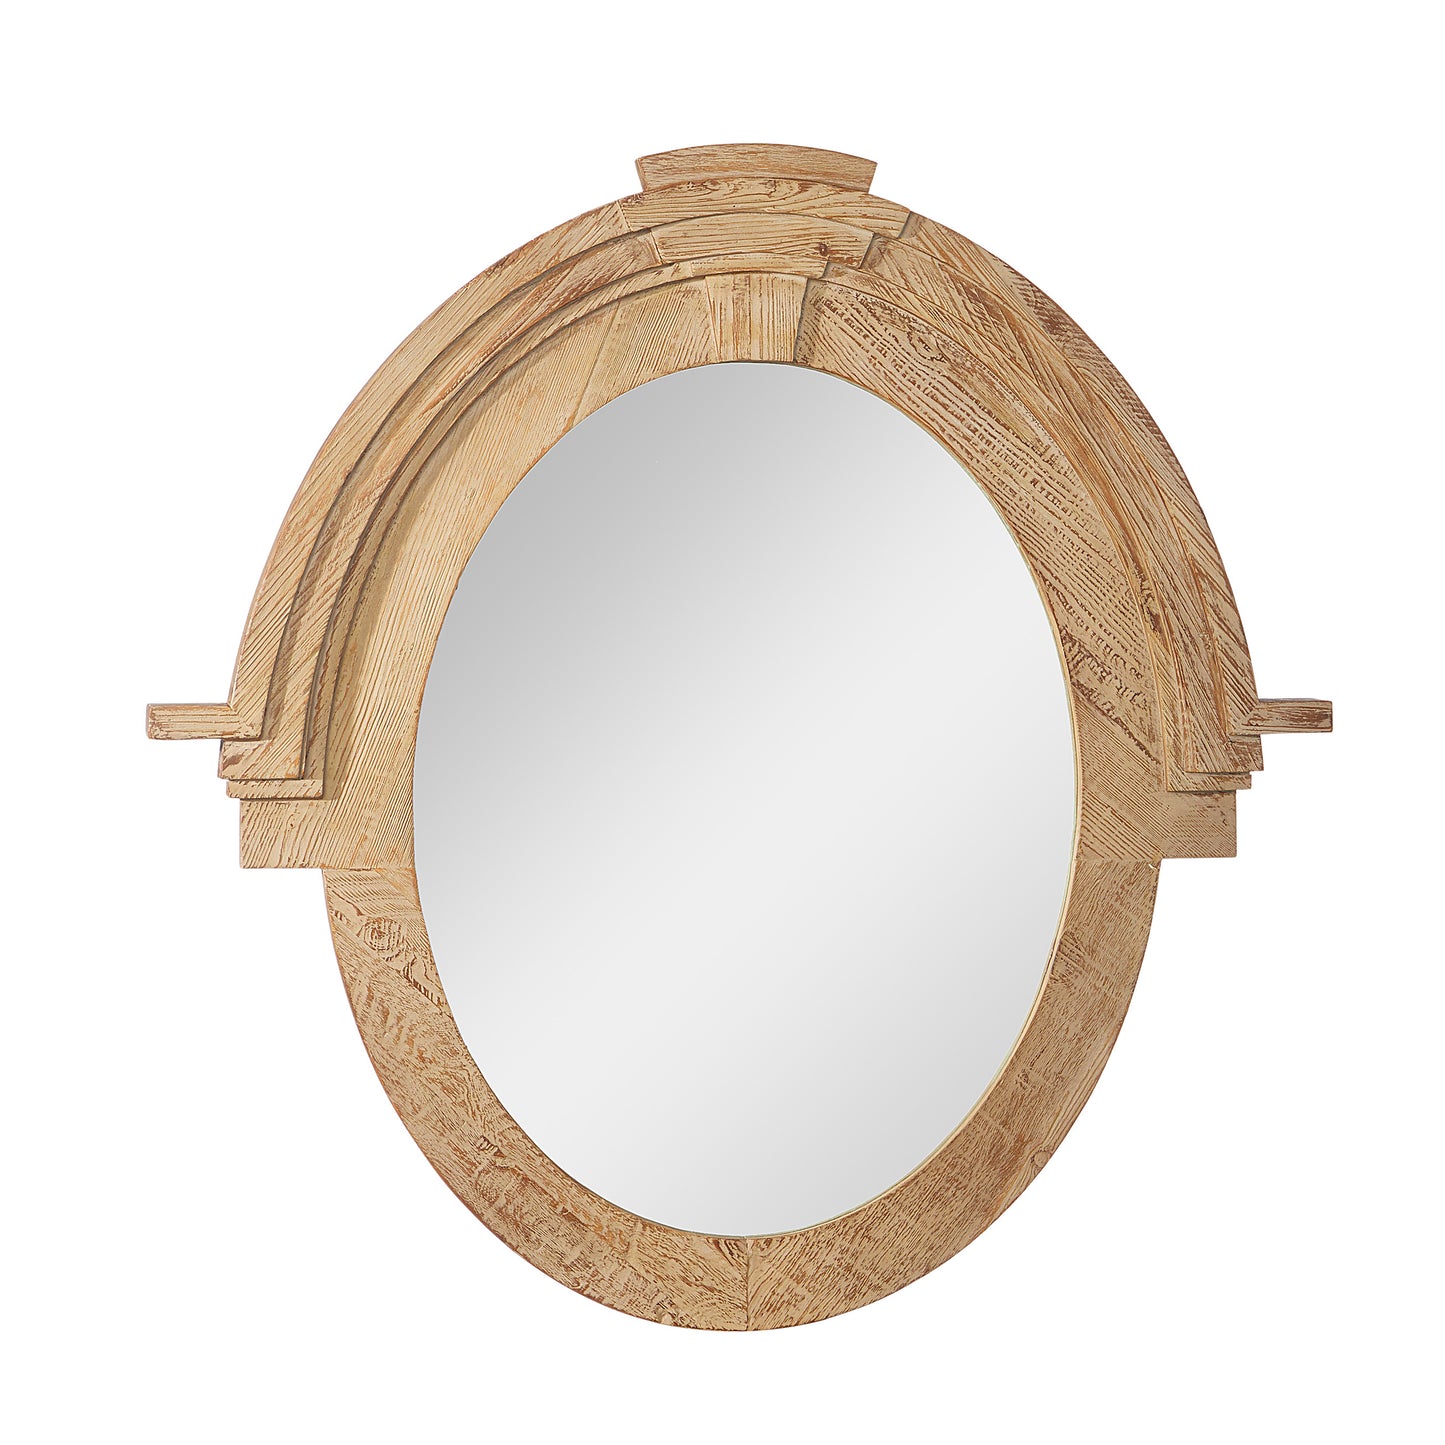 Mirror Oval Distressed